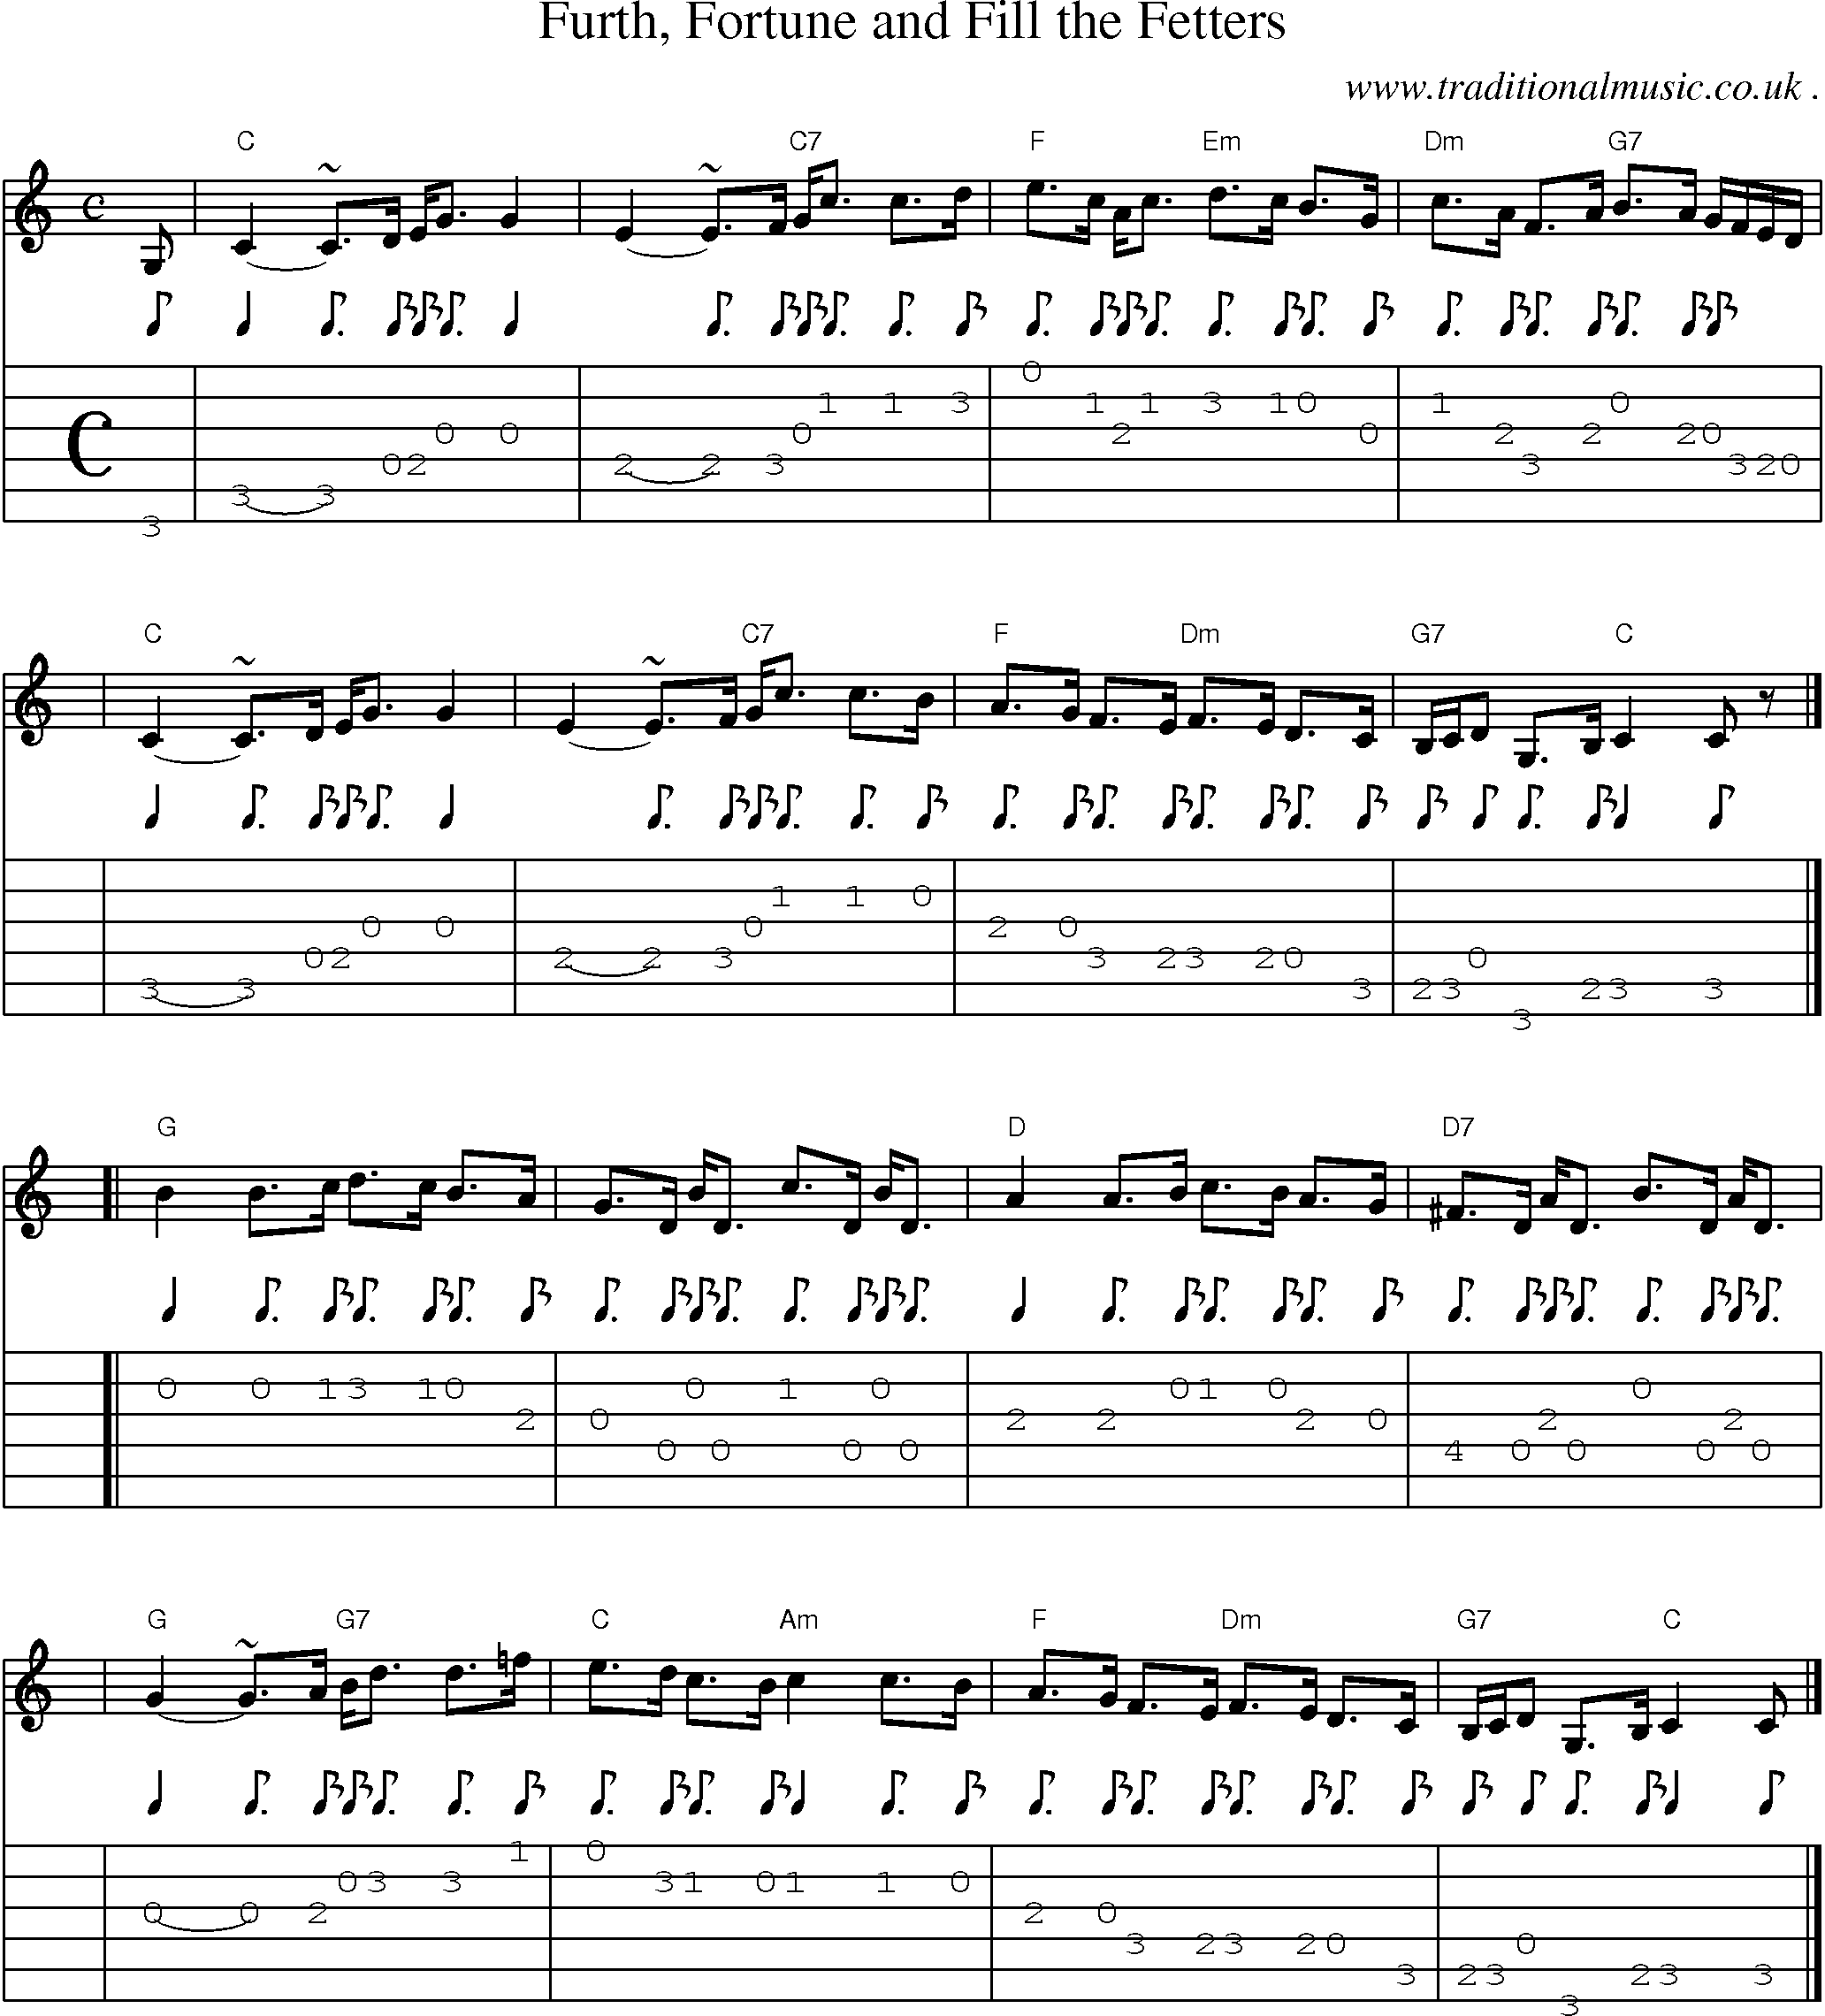 Sheet-music  score, Chords and Guitar Tabs for Furth Fortune And Fill The Fetters